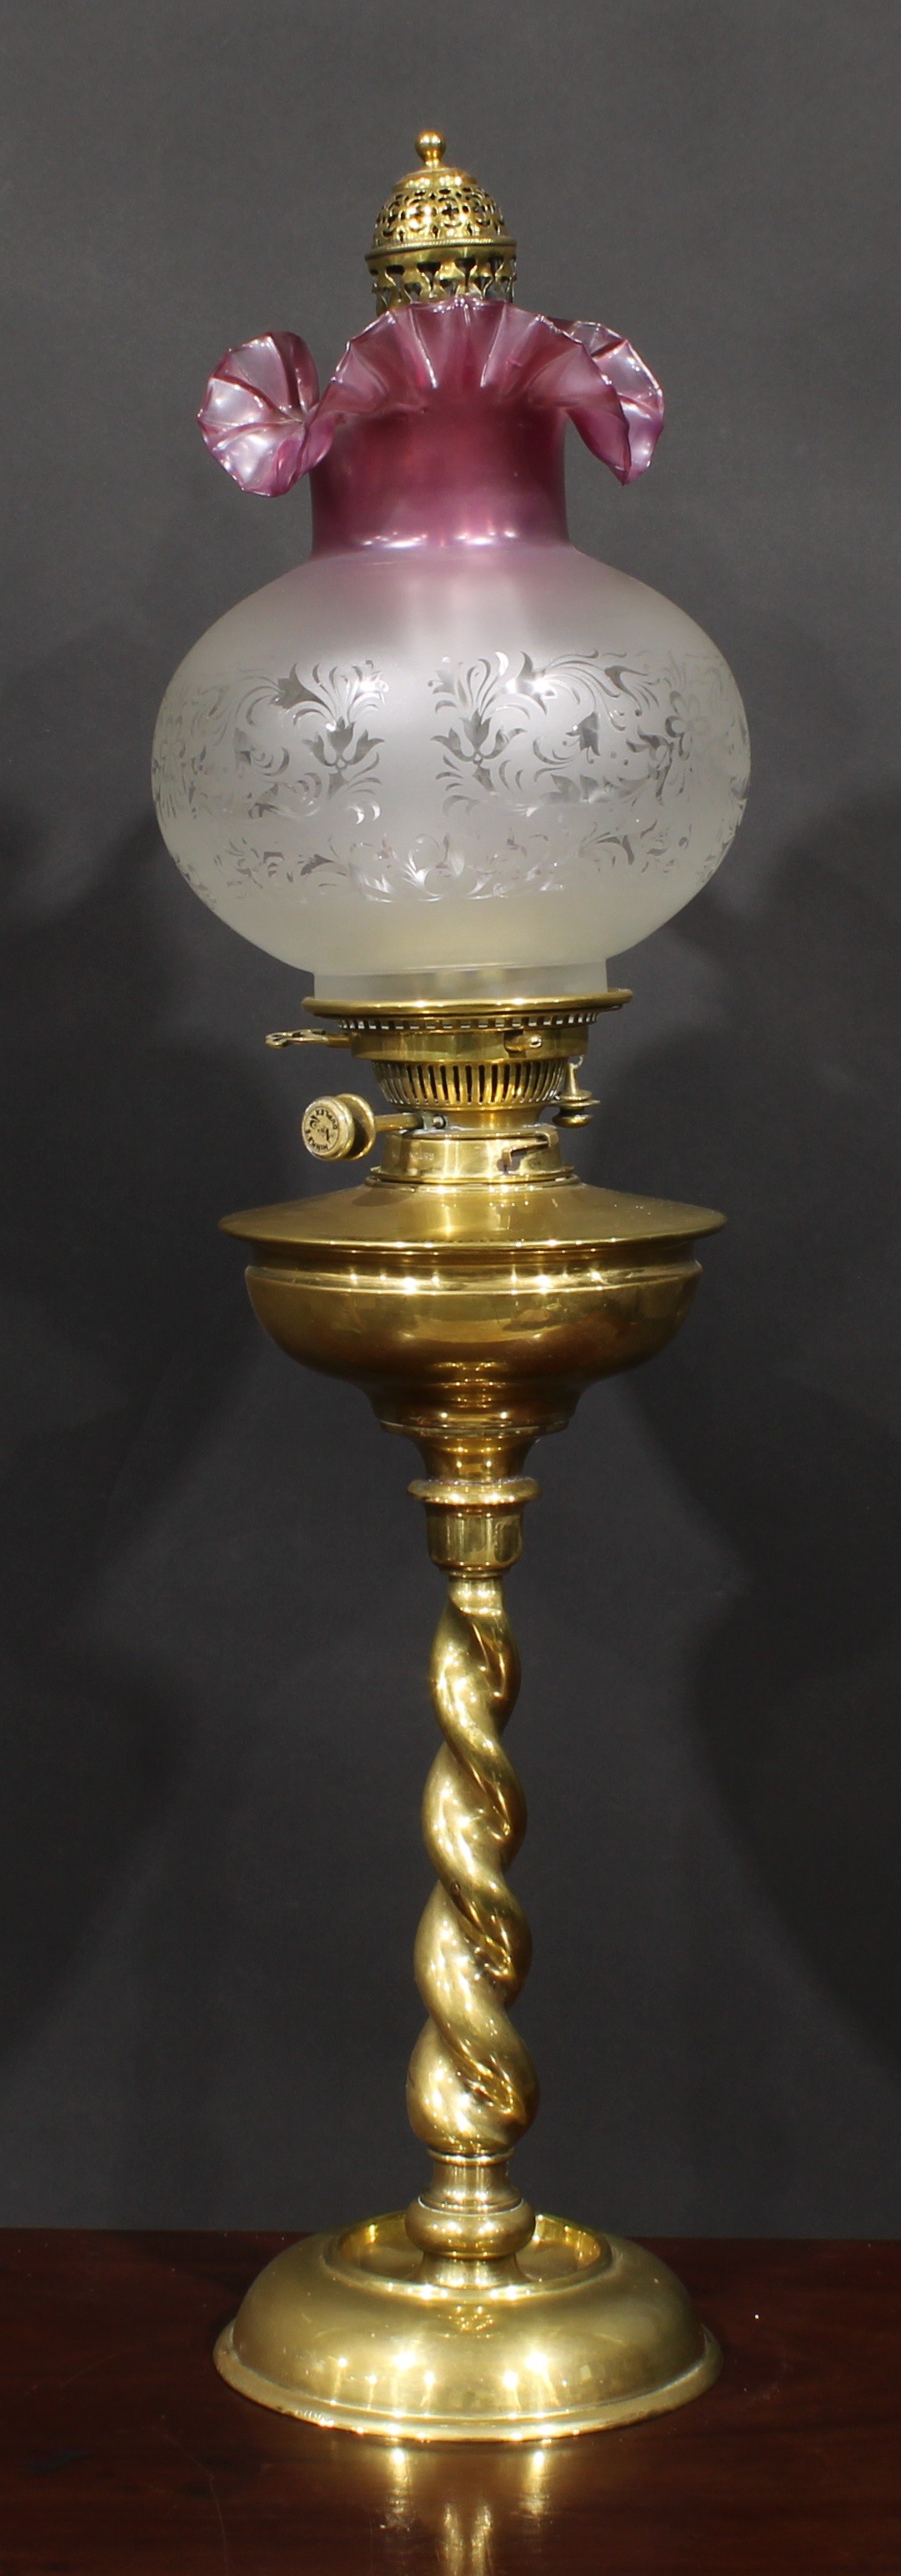 A 19th century brass oil lamp, circular brass font, Hinks's No.2 Duplex twin burner, frosted glass - Image 2 of 2